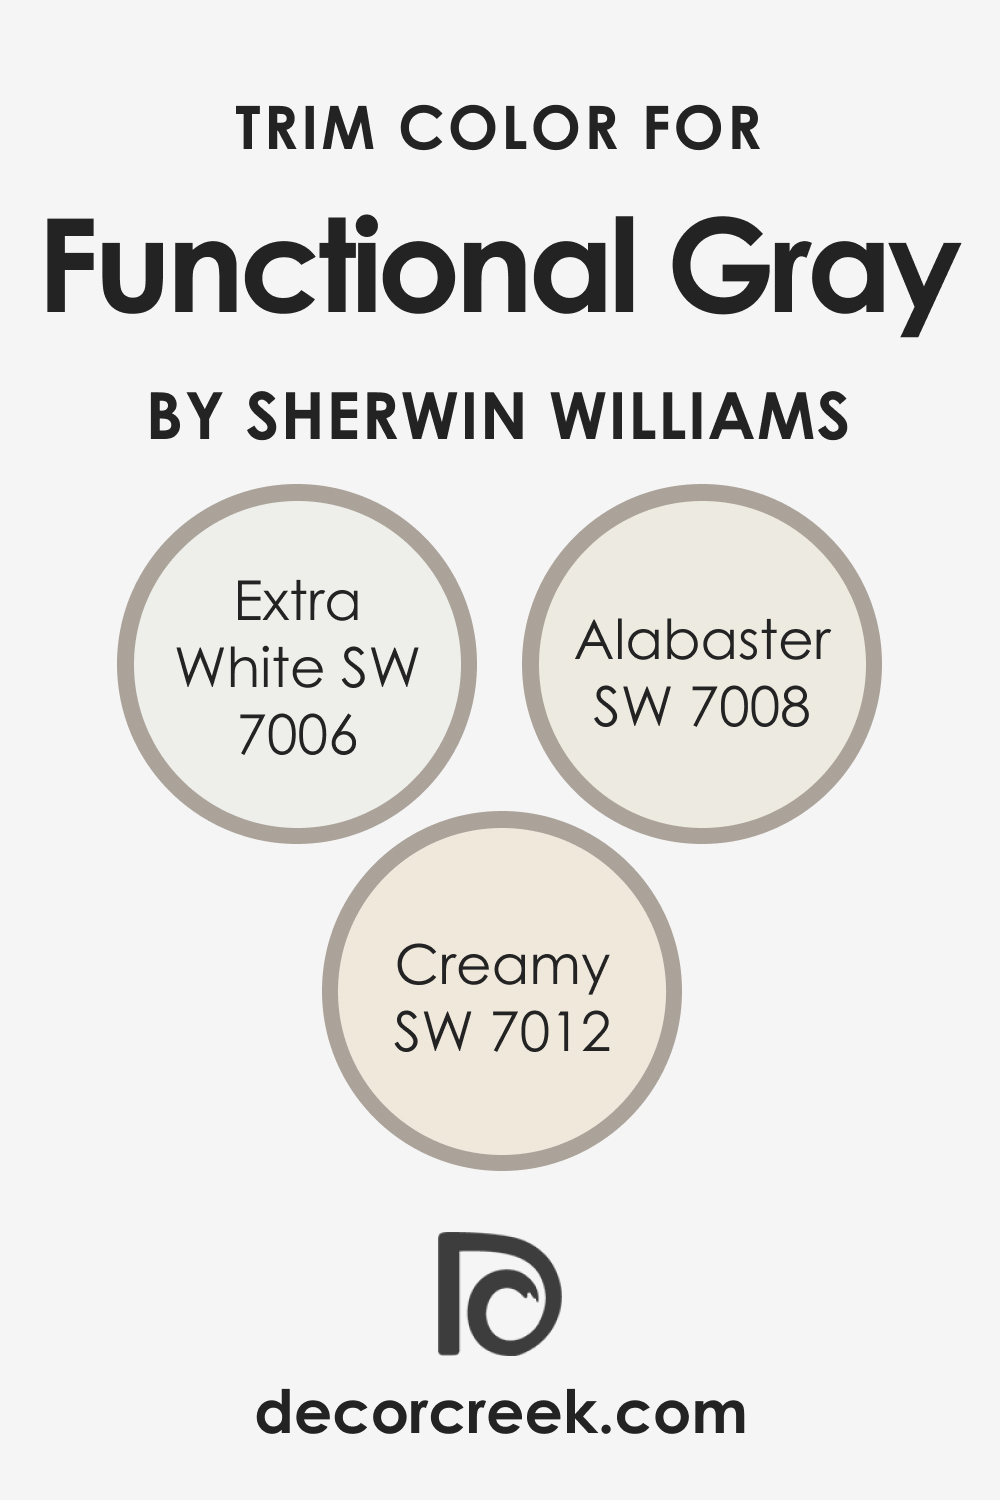 Trim Colors of SW 7024 Functional Gray